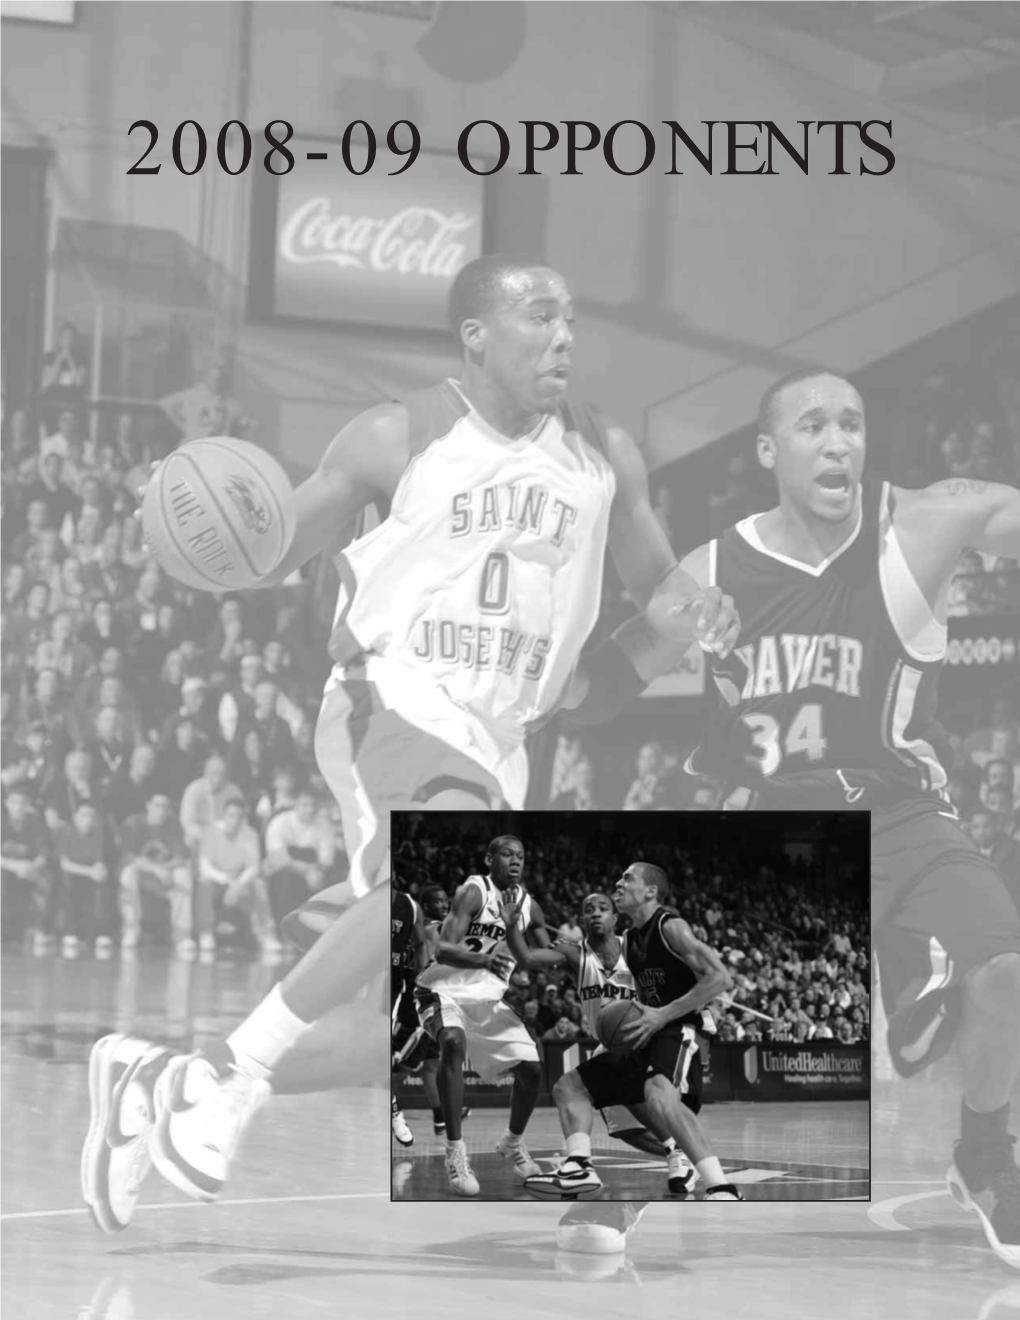 2008-09 OPPONENTS Ball State Cardinals Creighton Bluejays January 3 • Worthen Arena December 6 • the Palestra